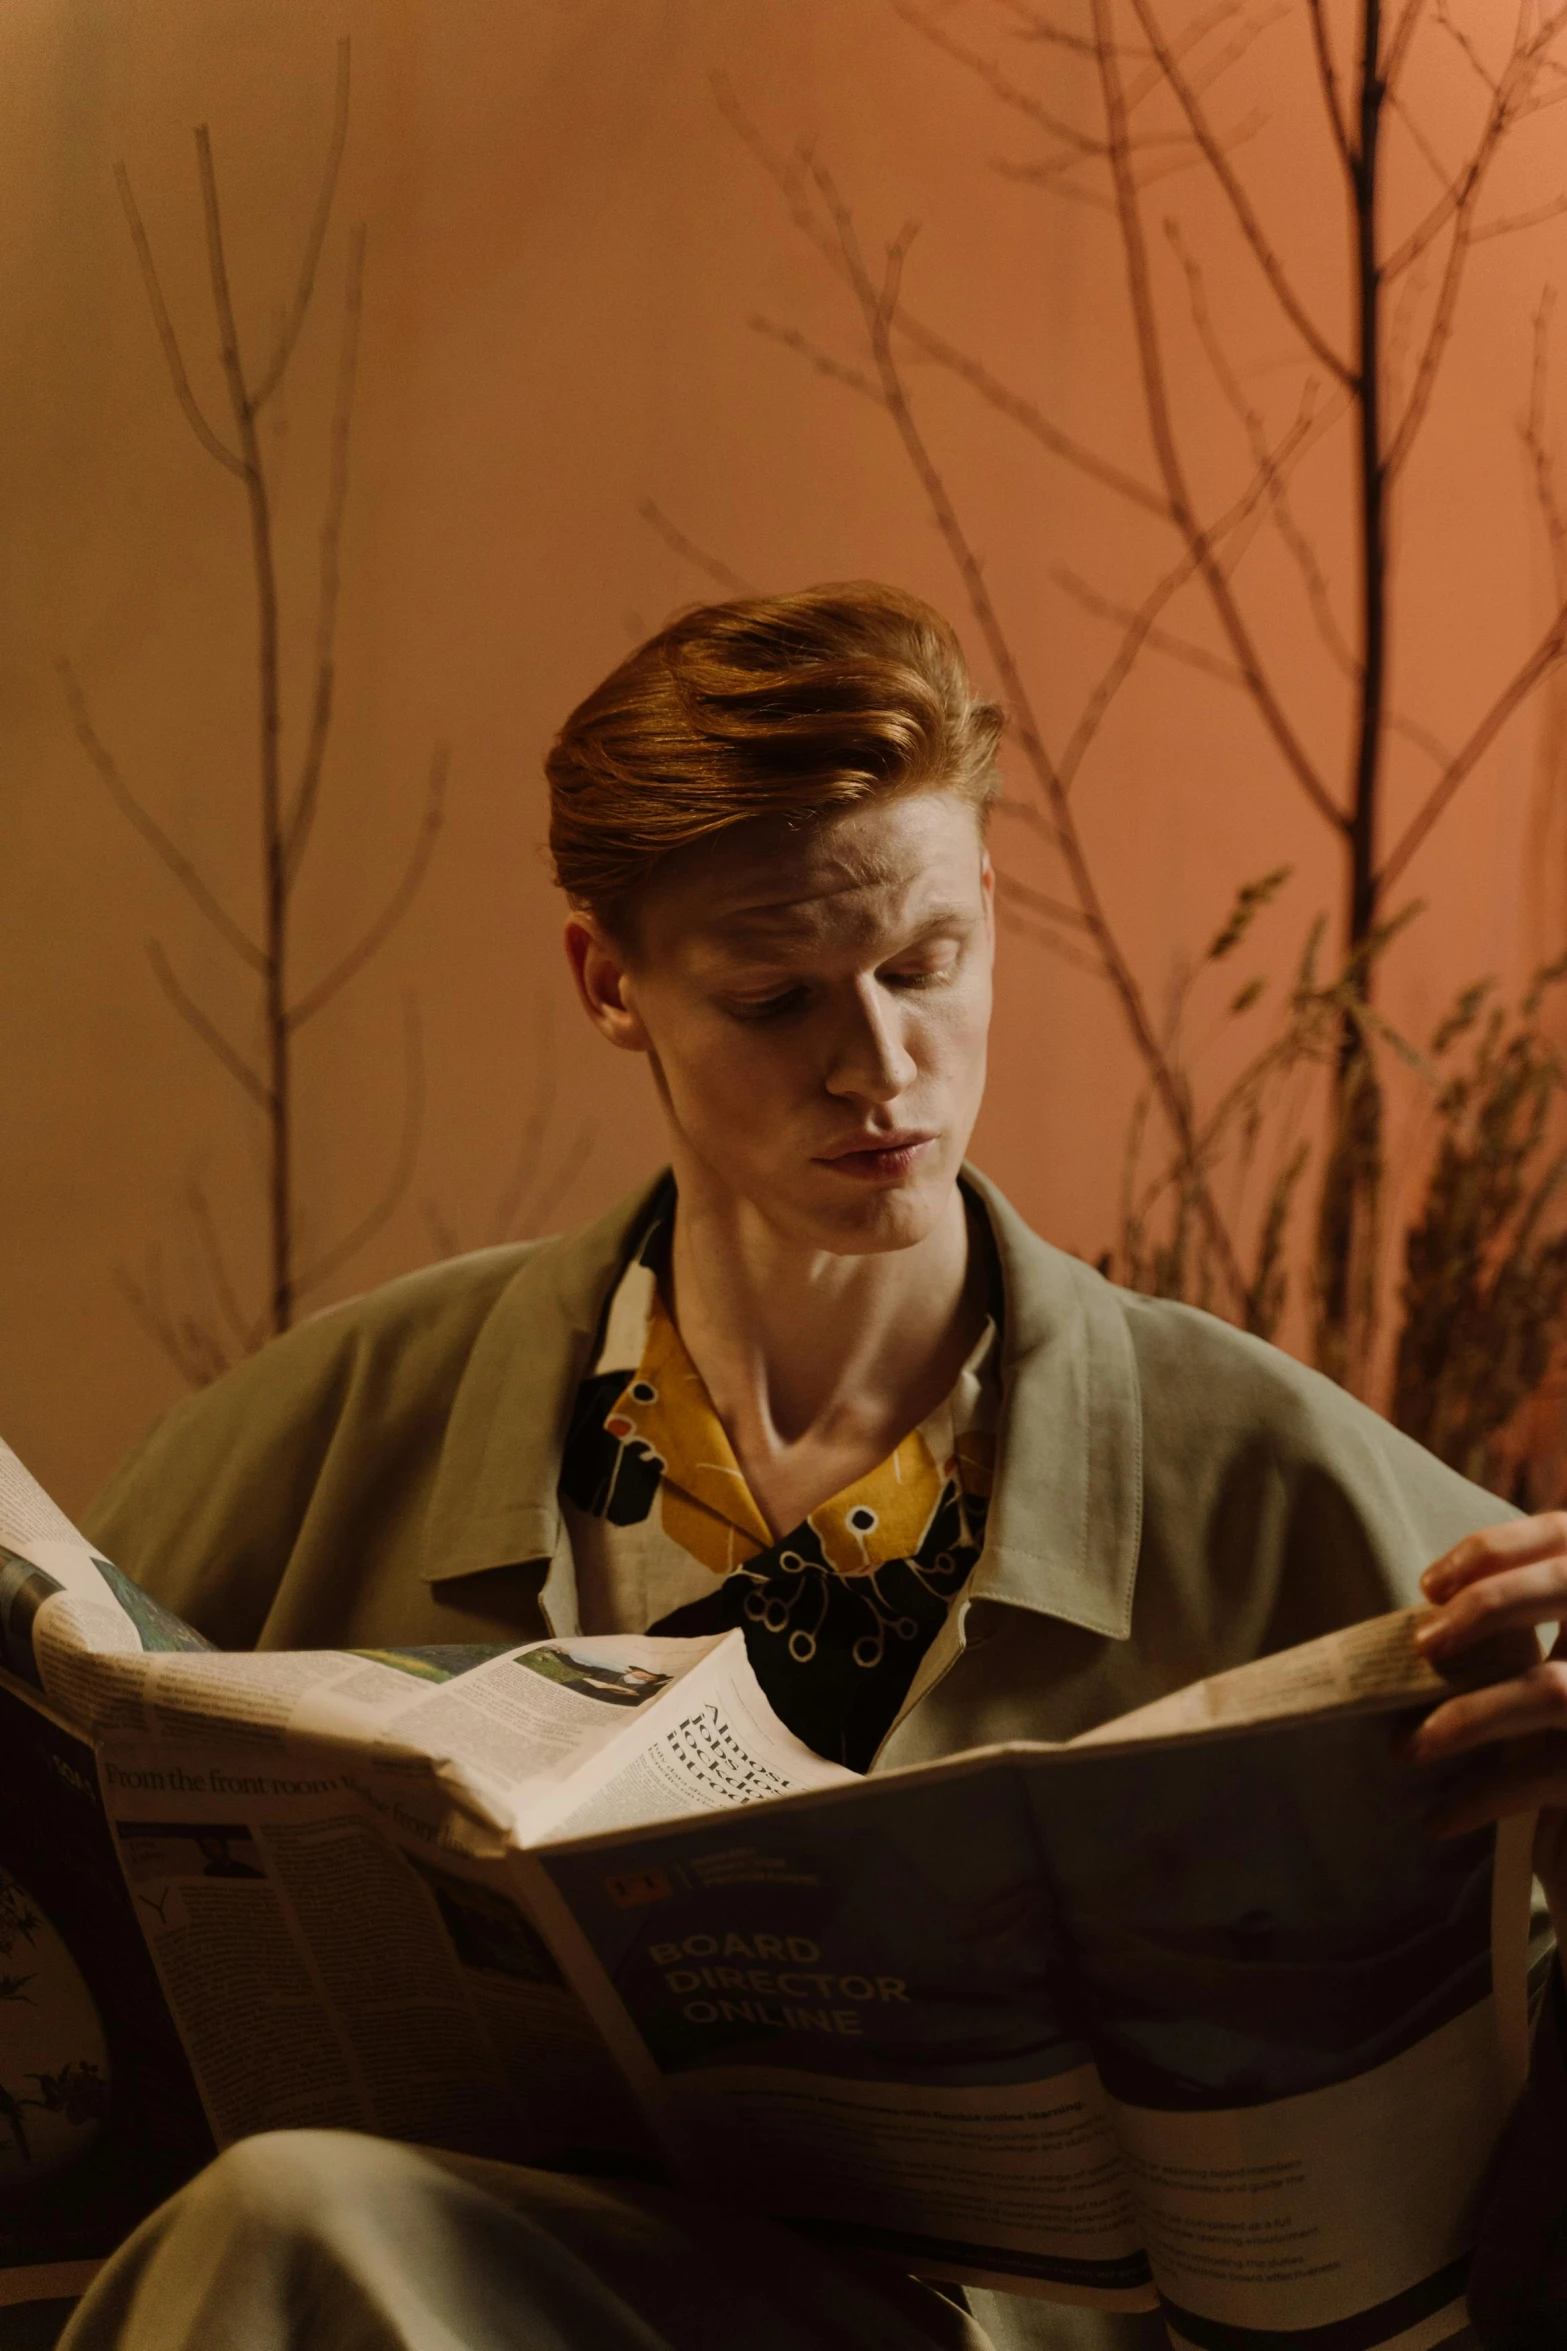 a man sitting on a couch reading a book, an album cover, fantastic realism, portrait tilda swinton, still from a music video, red haired teen boy, 15081959 21121991 01012000 4k